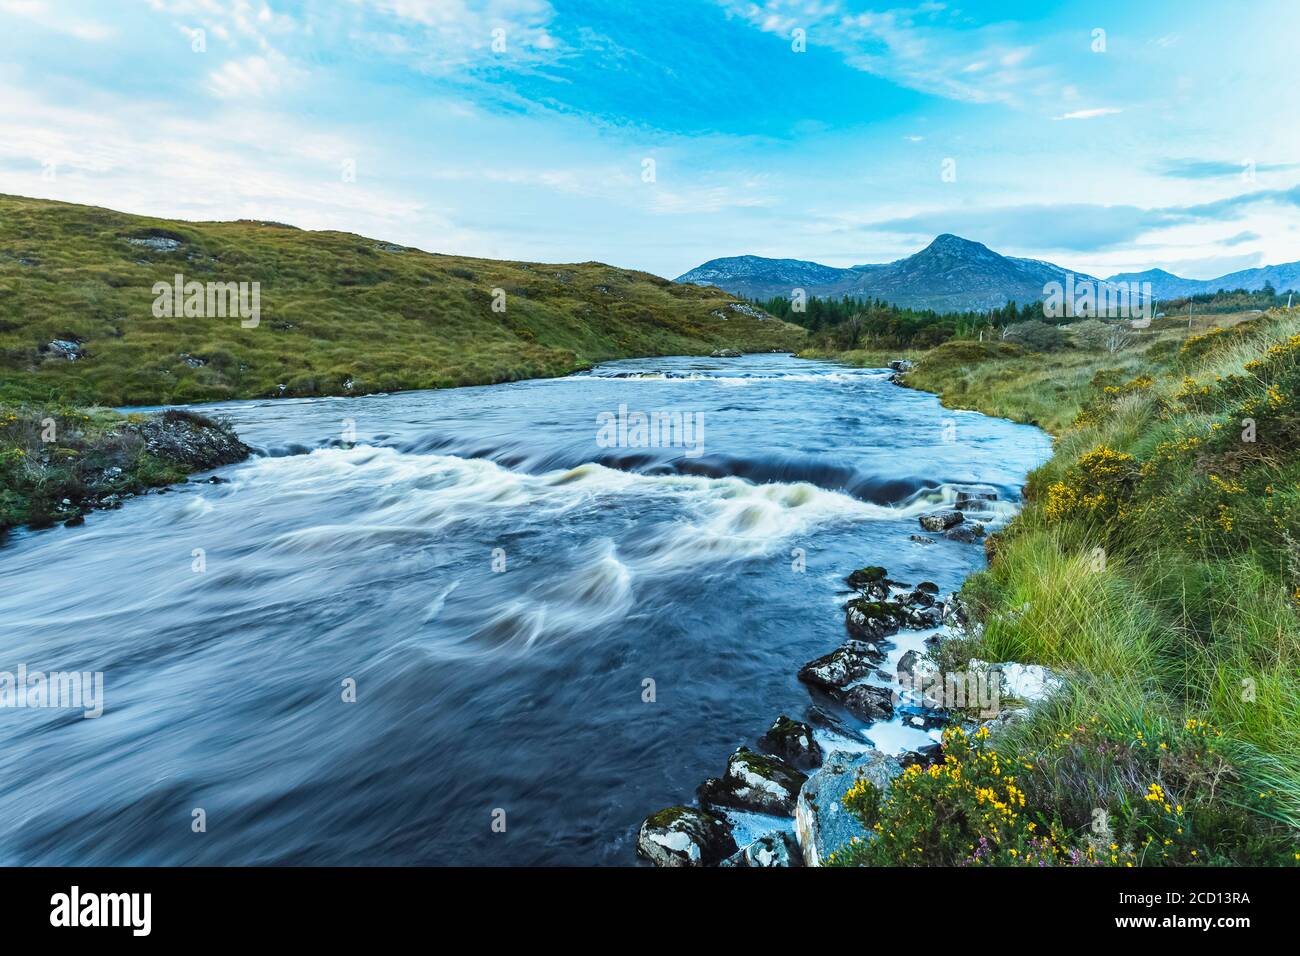 Small rapids on a river flowing through Connemara with a mountain in the background on a blue sky day; Connemara, County Galway, Ireland Stock Photo